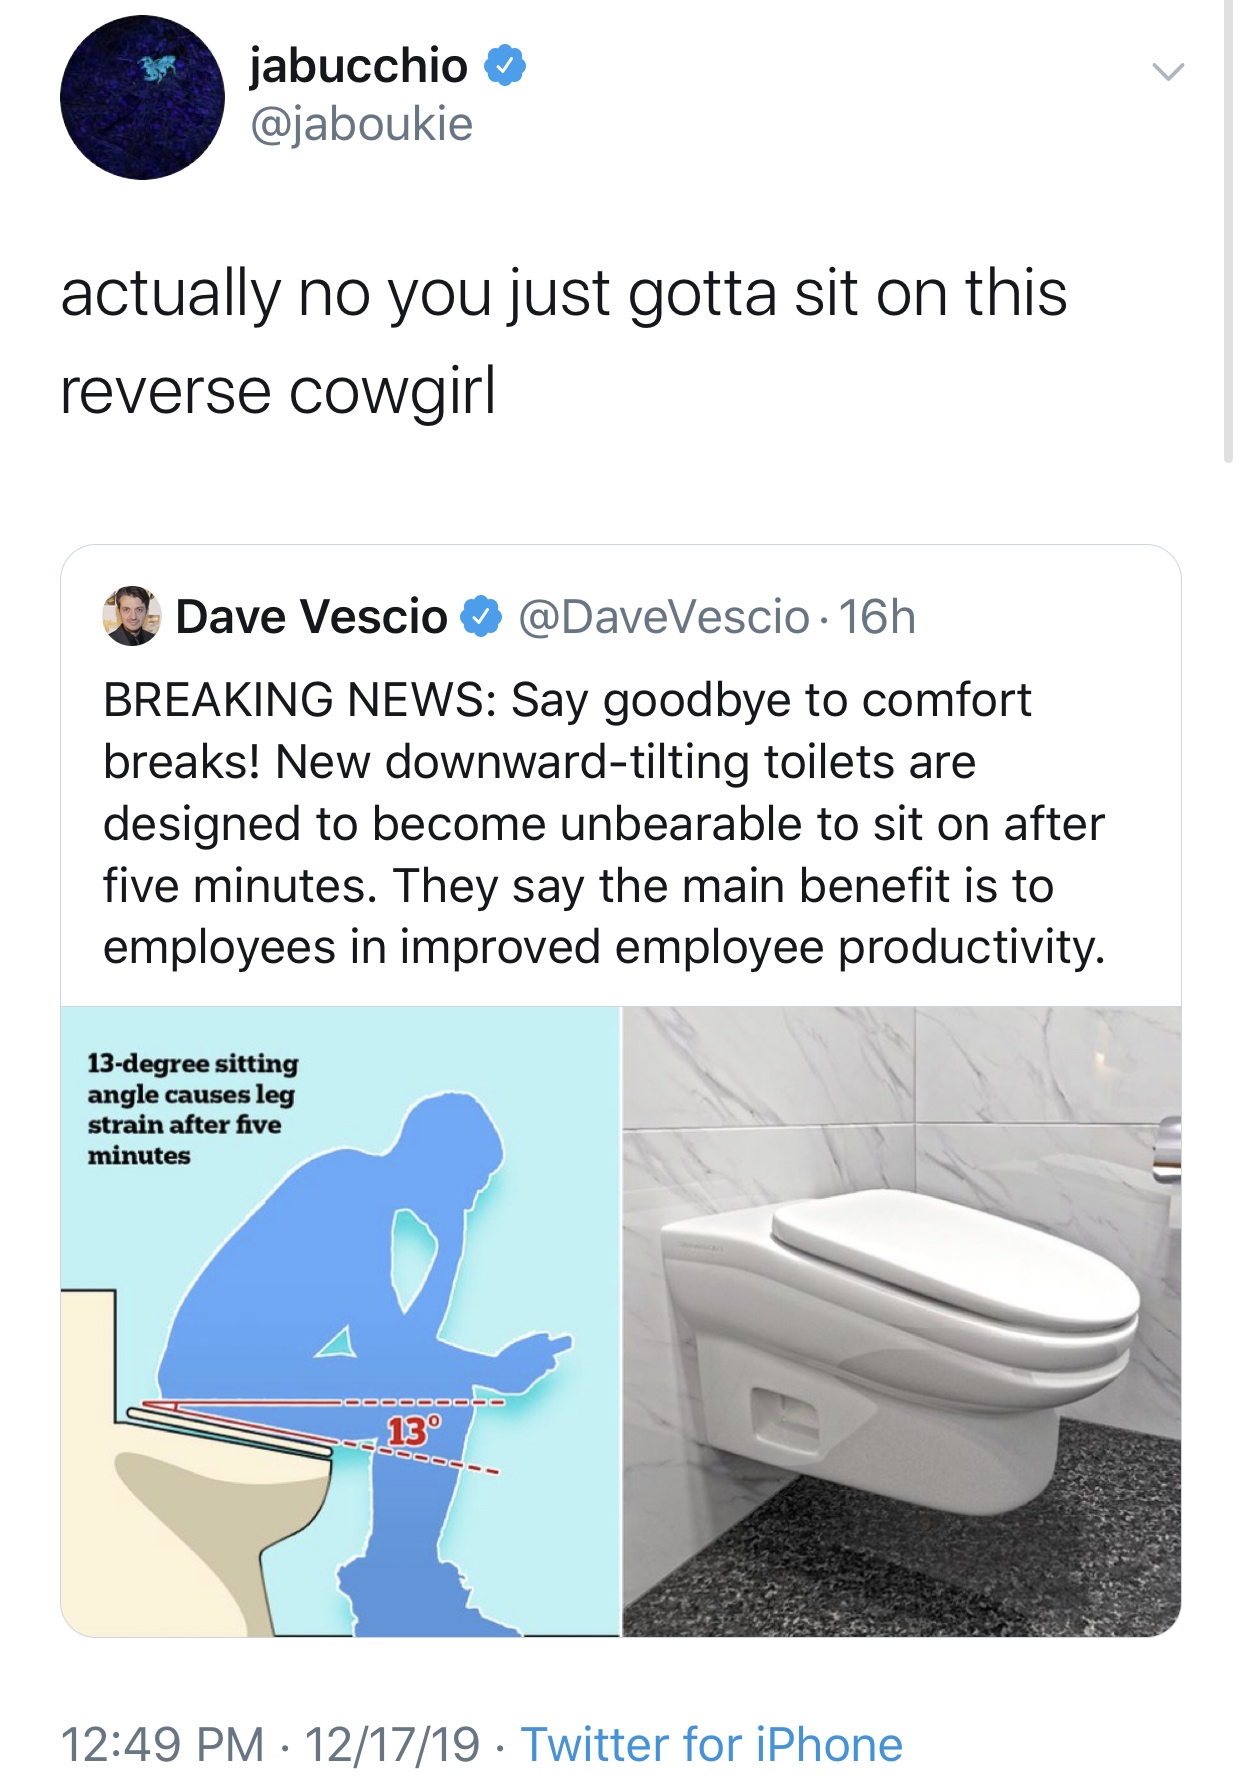 News - jabucchio actually no you just gotta sit on this reverse cowgirl Dave Vescio . 16h Breaking News Say goodbye to comfort breaks! New downwardtilting toilets are designed to become unbearable to sit on after five minutes. They say the main benefit is